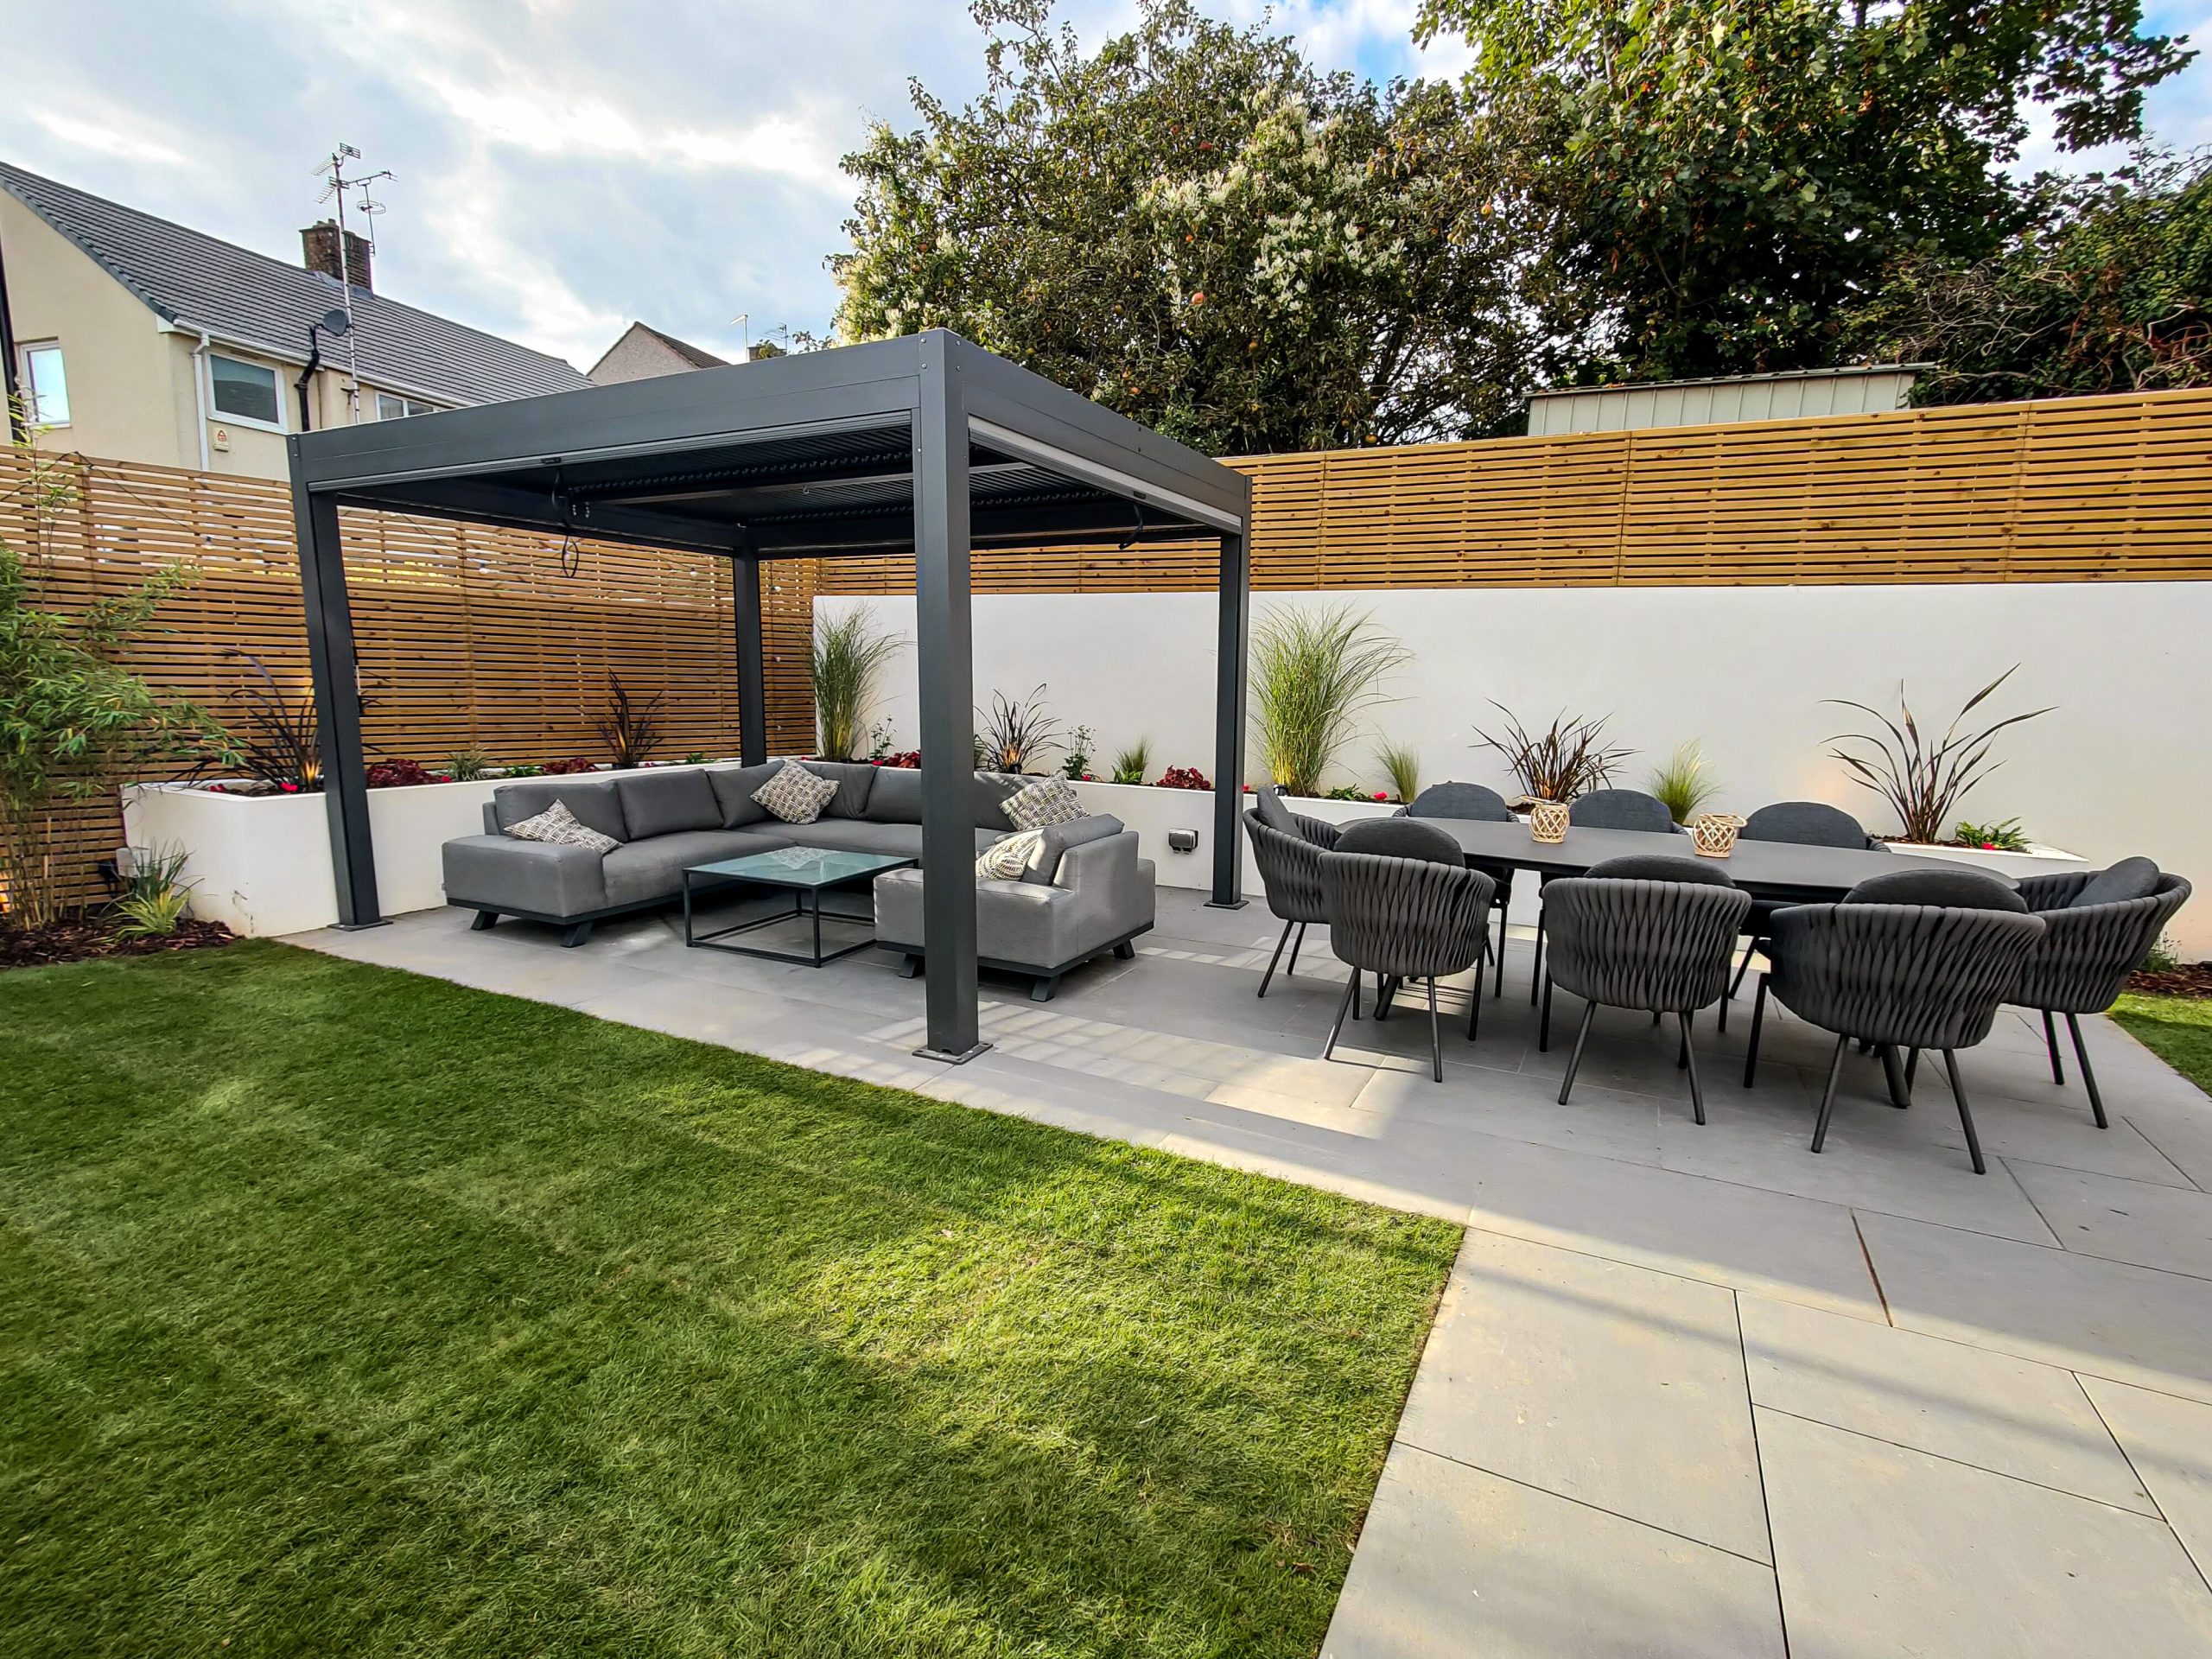 Bromley family garden with raised beds, patio, pergola and slatted fencing